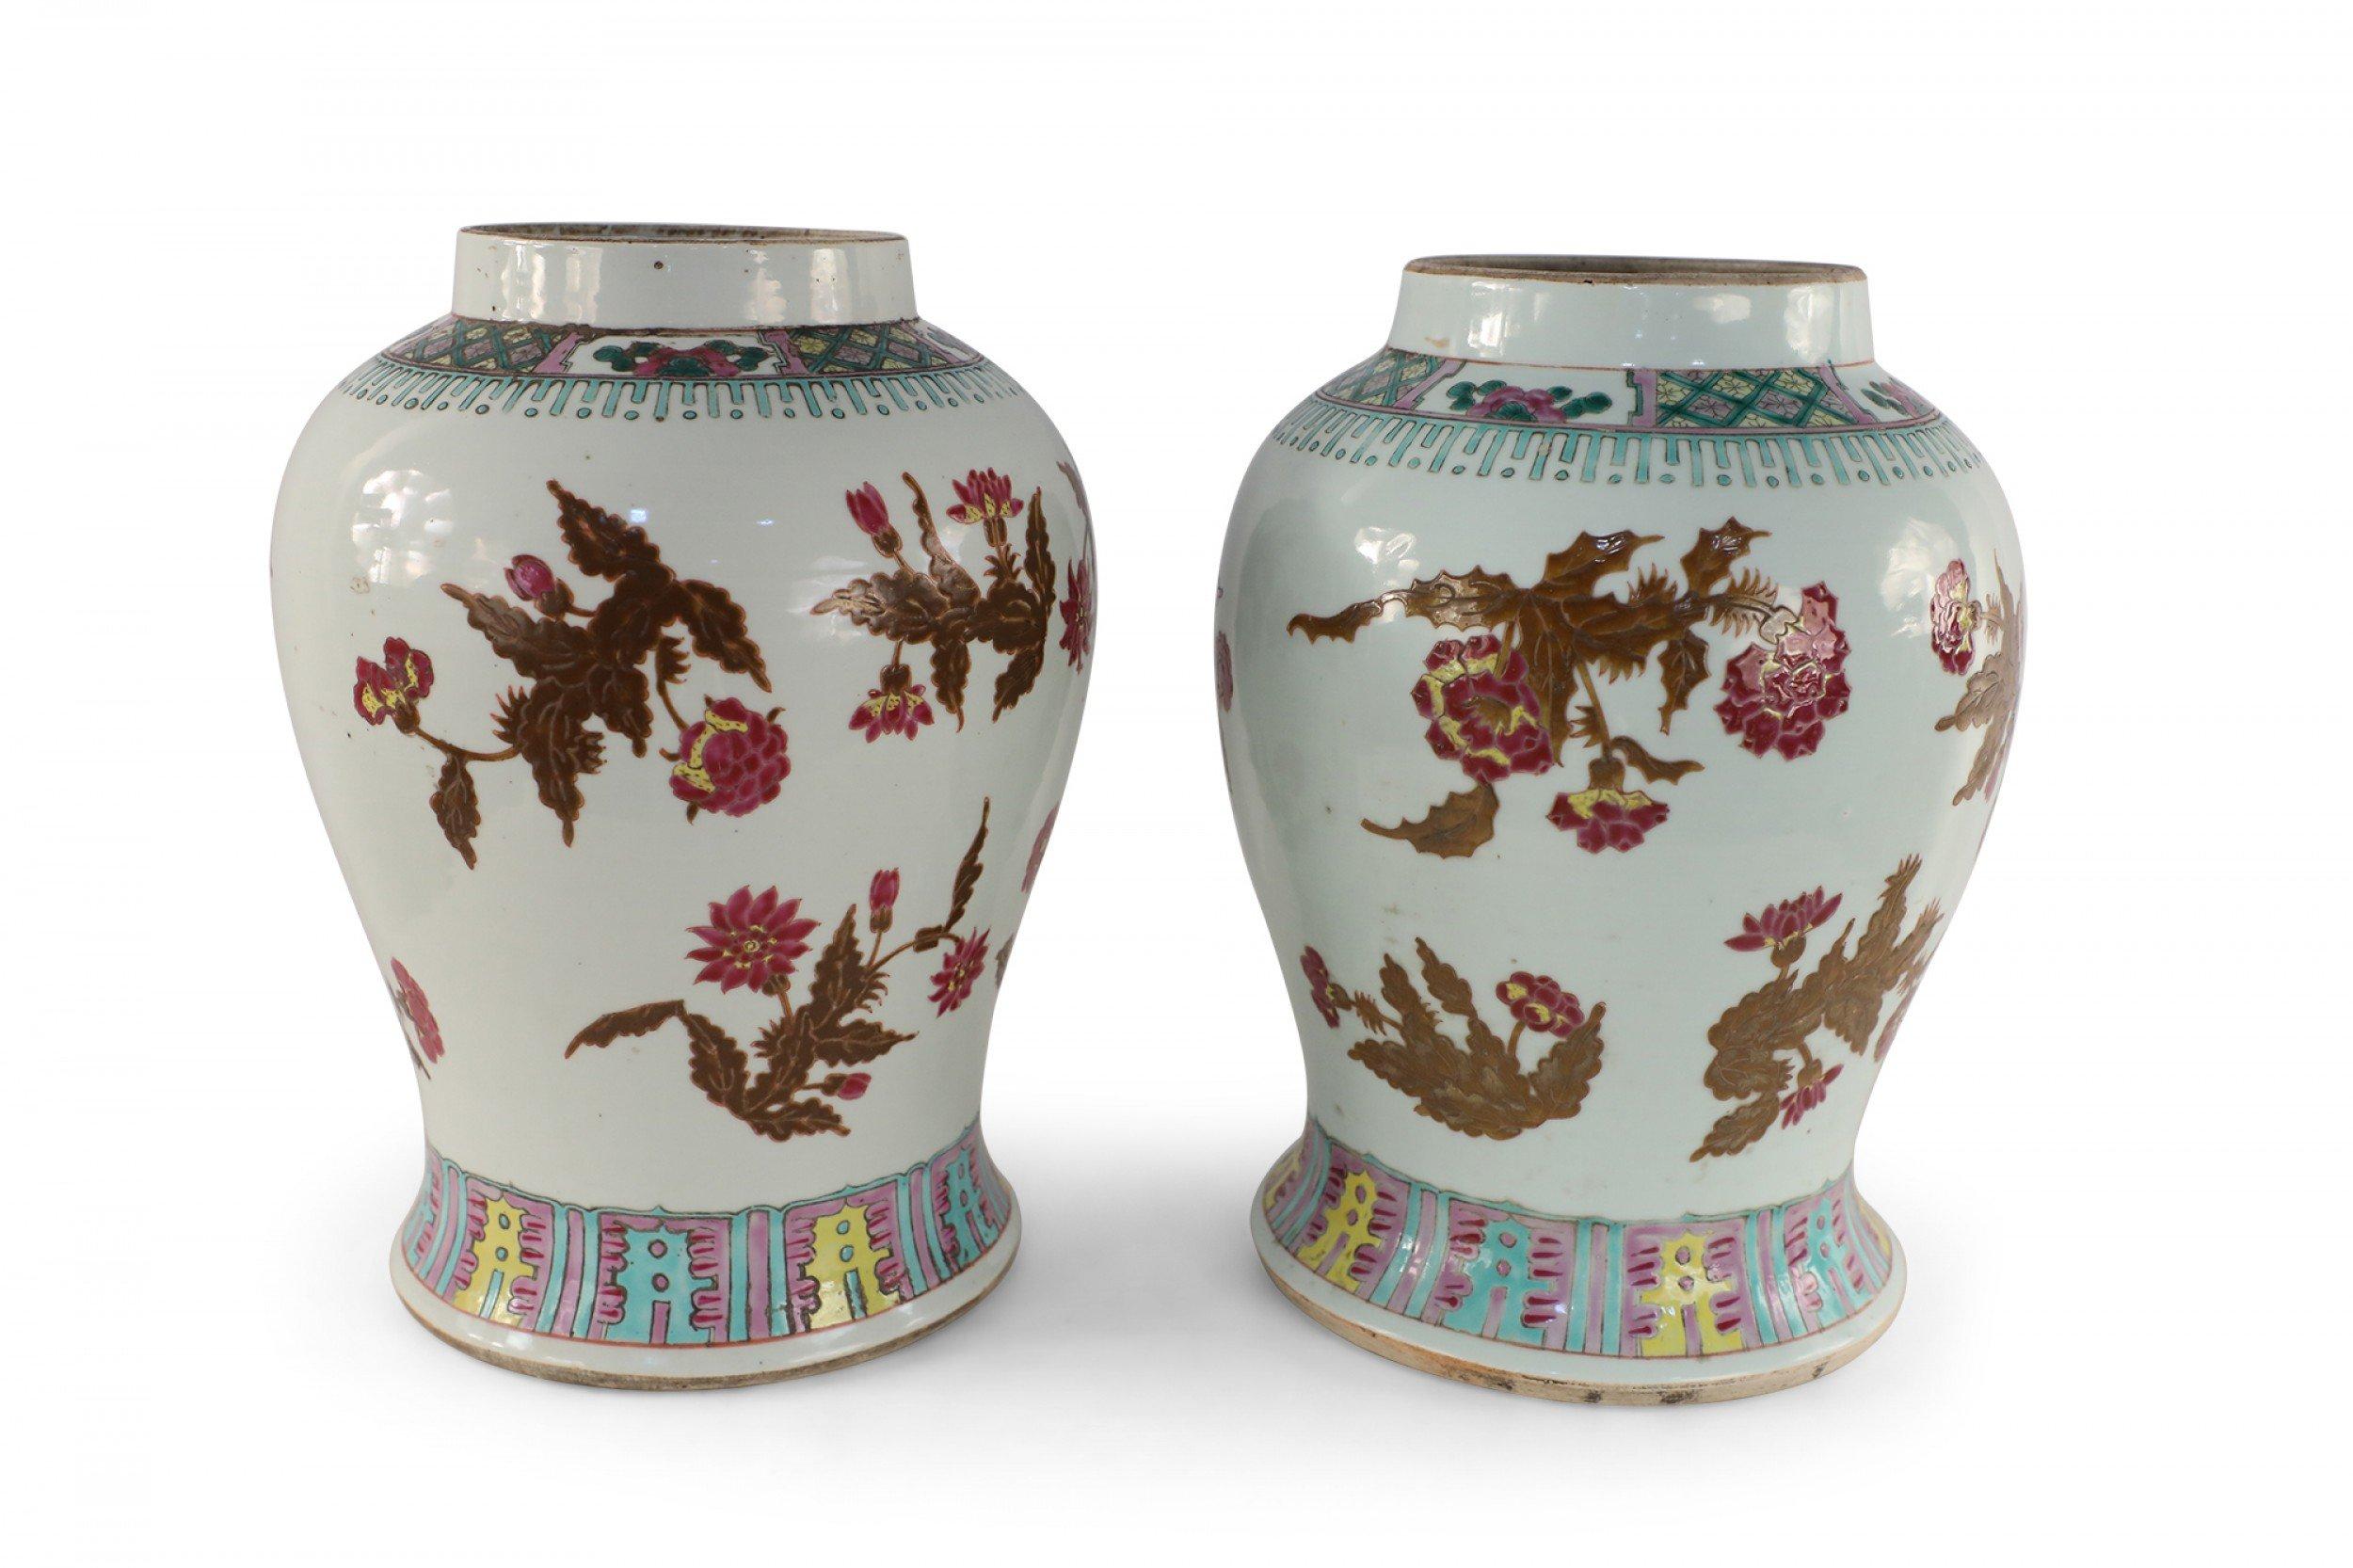 Pair of Chinese White and Umber Floral Design Porcelain Vases For Sale 4